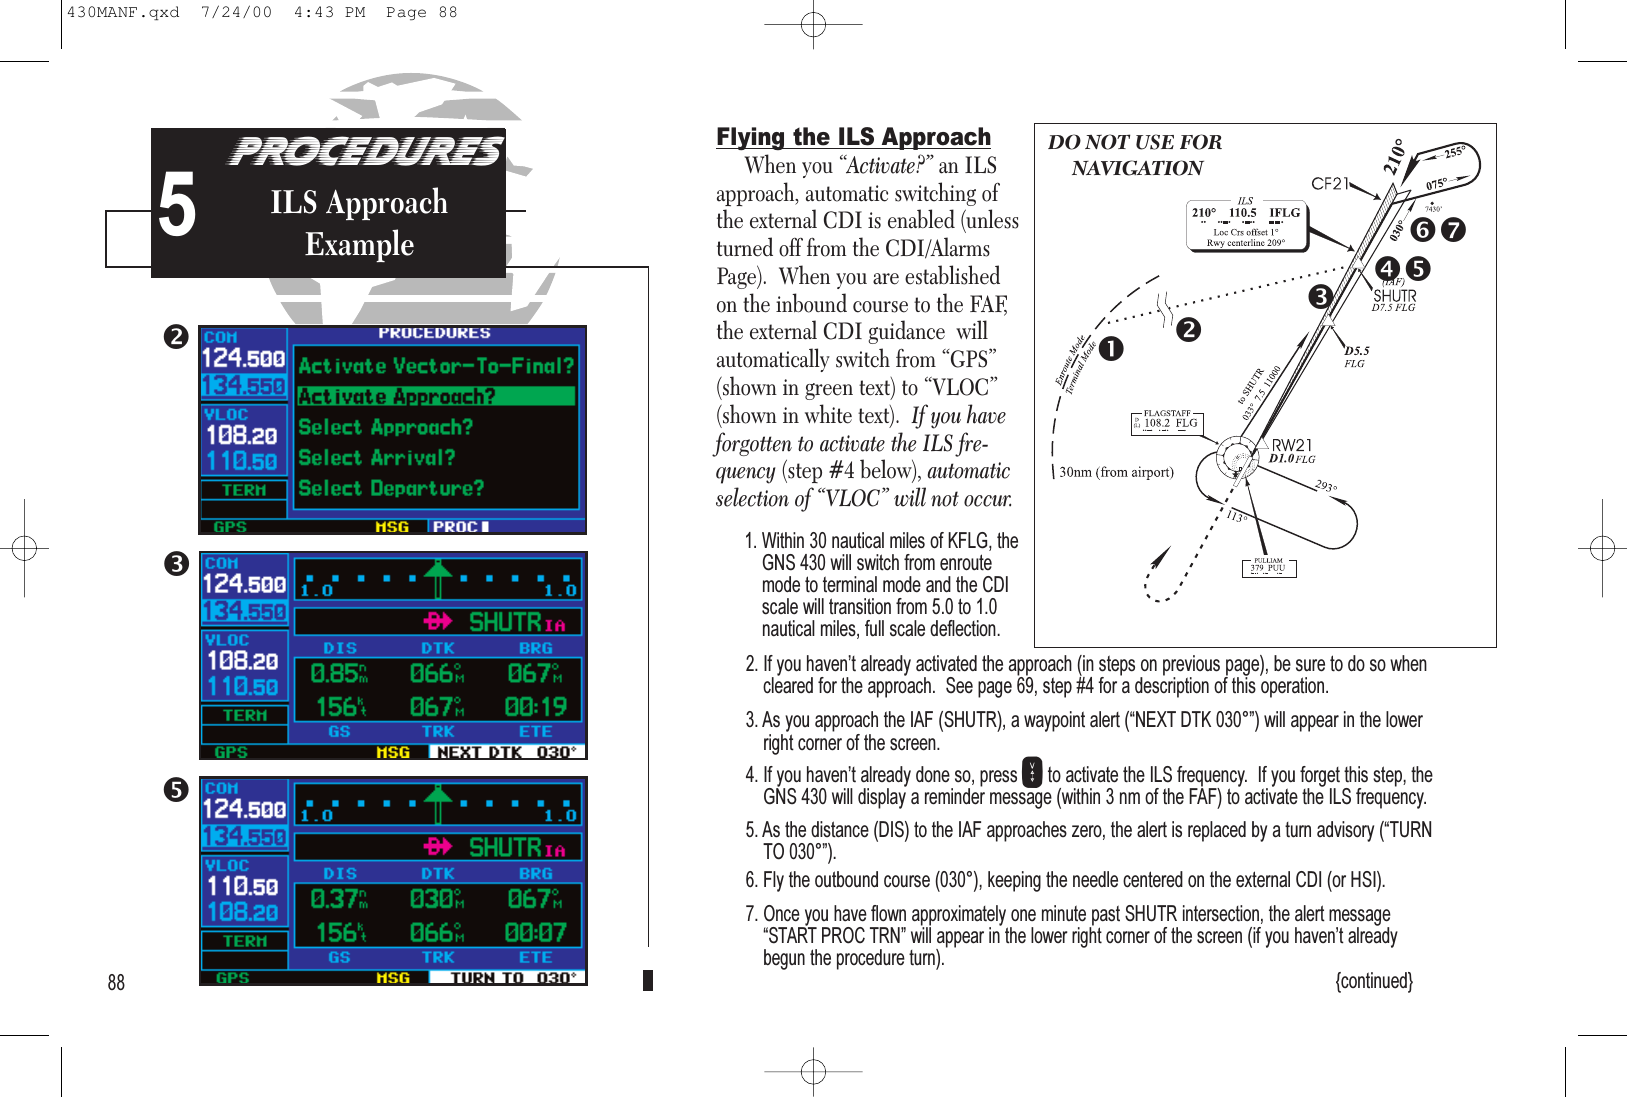 PROCEDURESApproach Examples5Flying the ILS ApproachWhen you “Activate?” an ILSapproach, automatic switching ofthe external CDI is enabled (unlessturned off from the CDI/AlarmsPage).  When you are establishedon the inbound course to the FAF,the external CDI guidance  willautomatically switch from “GPS”(shown in green text) to “VLOC”(shown in white text).  If you haveforgotten to activate the ILS fre-quency (step #4 below), automaticselection of “VLOC” will not occur.1. Within 30 nautical miles of KFLG, theGNS 430 will switch from enroutemode to terminal mode and the CDIscale will transition from 5.0 to 1.0nautical miles, full scale deflection.2. If you havent already activated the approach (in steps on previous page), be sure to do so whencleared for the approach.  See page 69, step #4 for a description of this operation.3. As you approach the IAF (SHUTR), a waypoint alert (NEXT DTK 030°) will appear in the lowerright corner of the screen. 4. If you havent already done so, press Vto activate the ILS frequency.  If you forget this step, theGNS 430 will display a reminder message (within 3 nm of the FAF) to activate the ILS frequency.5. As the distance (DIS) to the IAF approaches zero, the alert is replaced by a turn advisory (TURNTO 030°).6. Fly the outbound course (030°), keeping the needle centered on the external CDI (or HSI).7. Once you have flown approximately one minute past SHUTR intersection, the alert messageSTART PROC TRN will appear in the lower right corner of the screen (if you havent alreadybegun the procedure turn).{continued}88PROCEDURESILS ApproachExample5DO NOT USE FORNAVIGATION430MANF.qxd  7/24/00  4:43 PM  Page 88